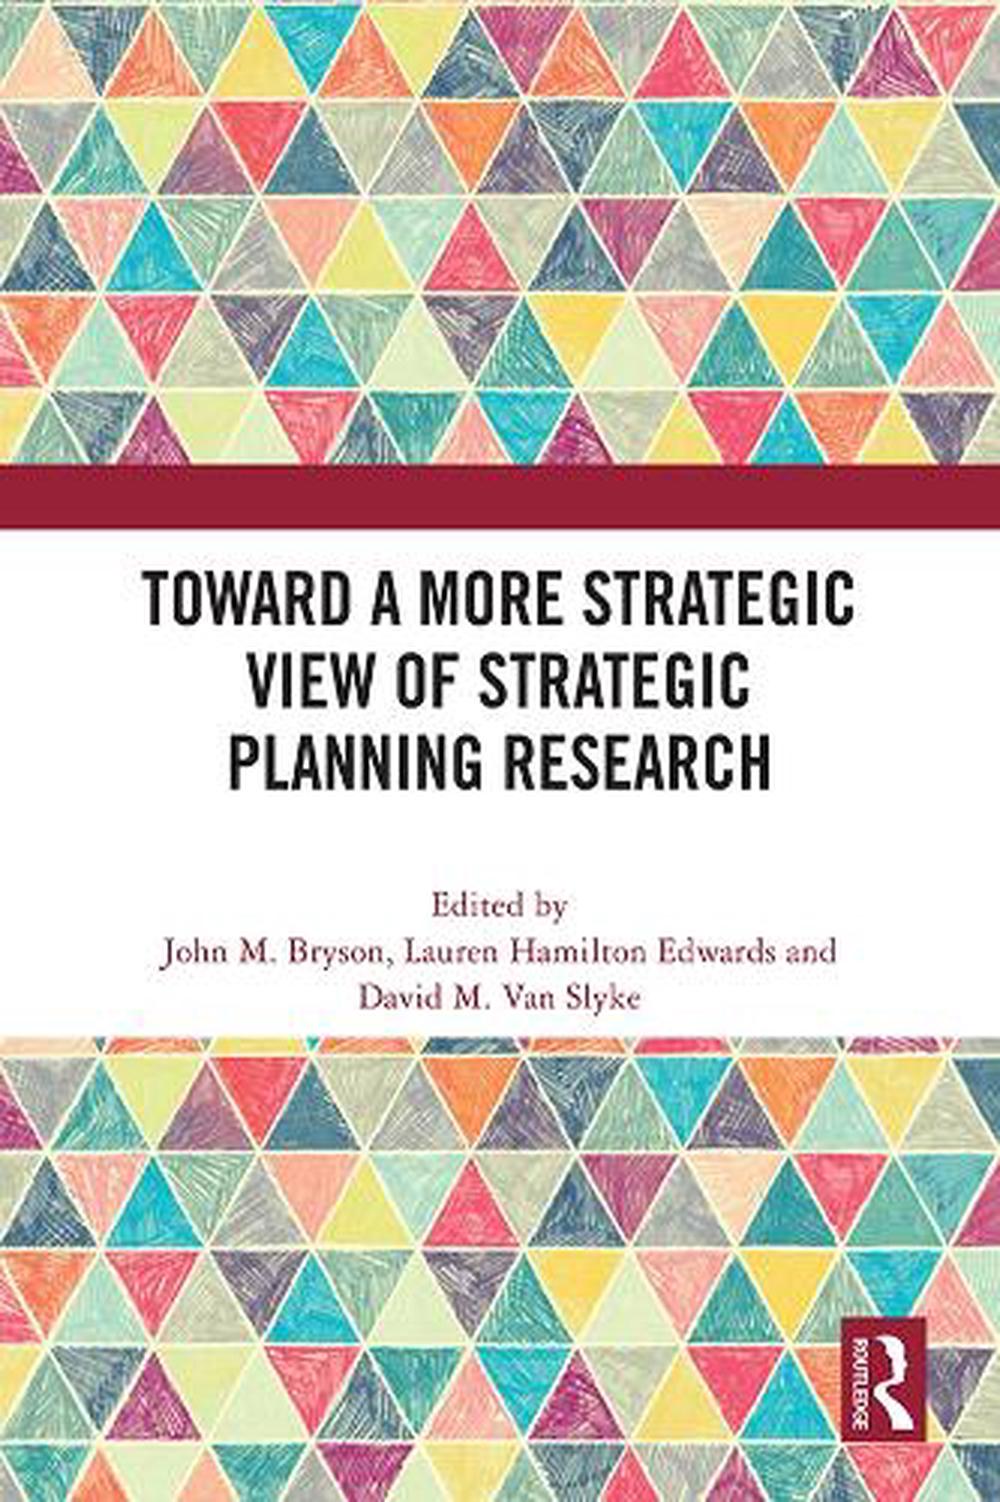 research on strategic planning